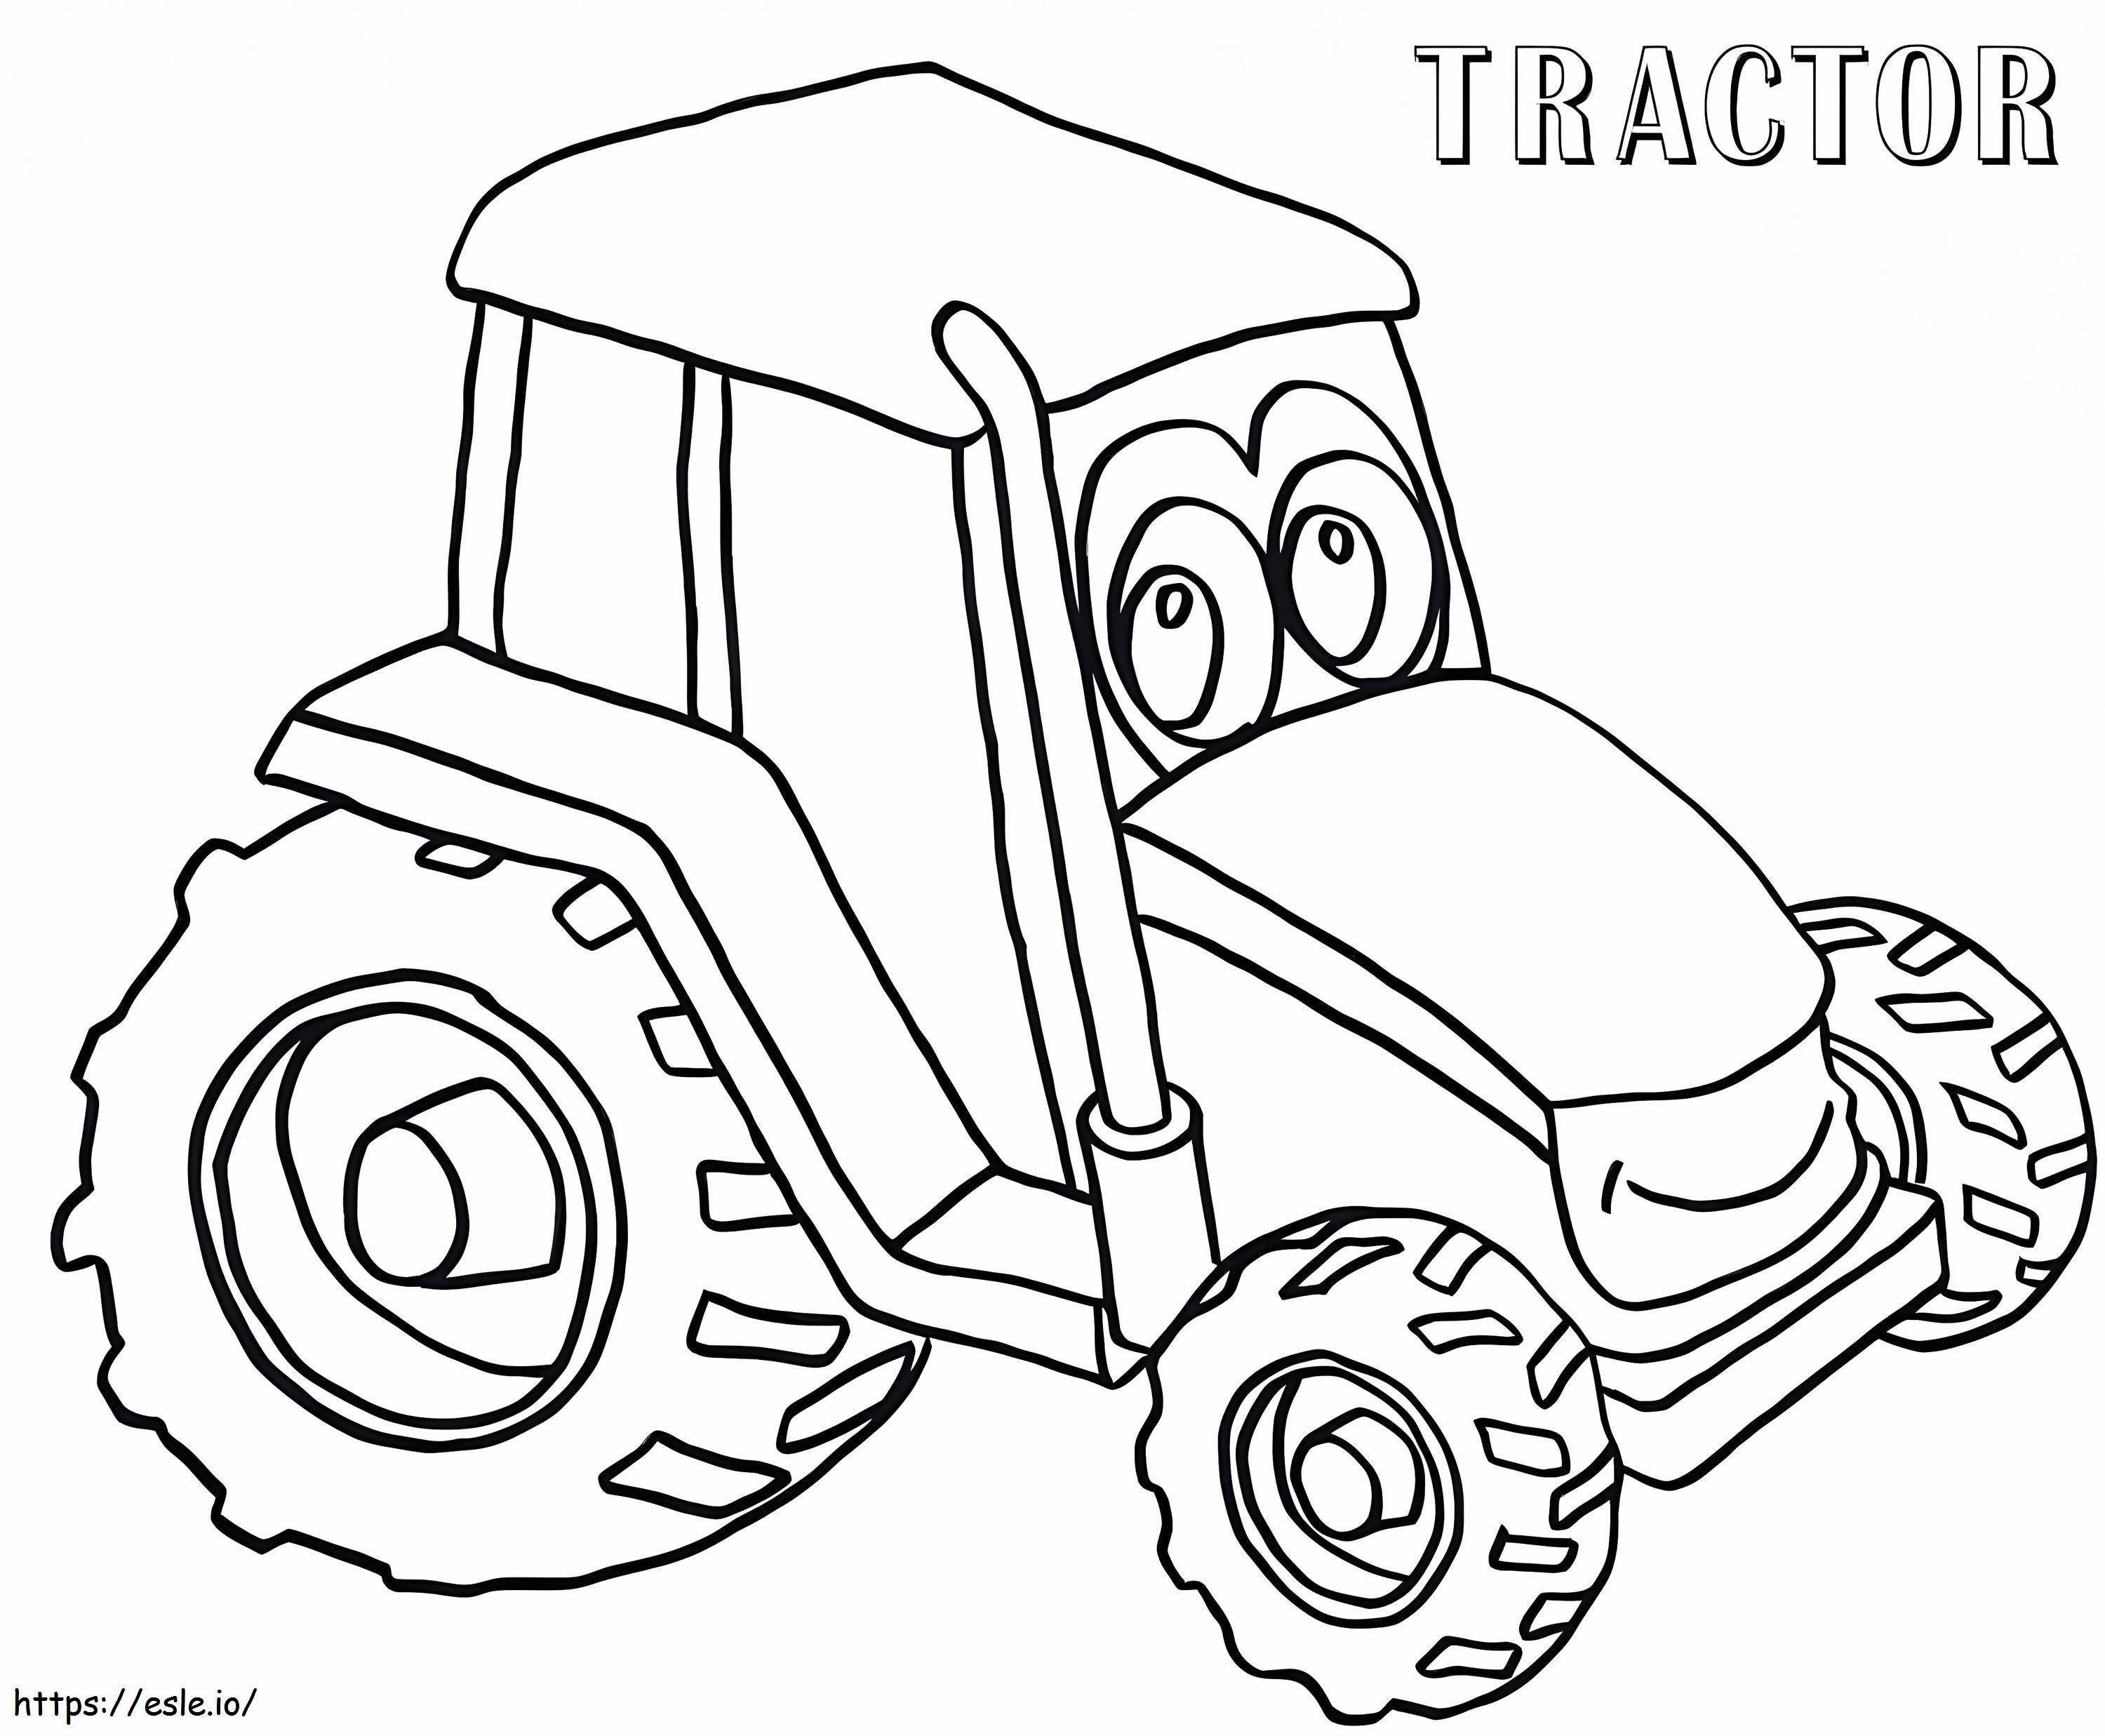 Tractor 1 coloring page